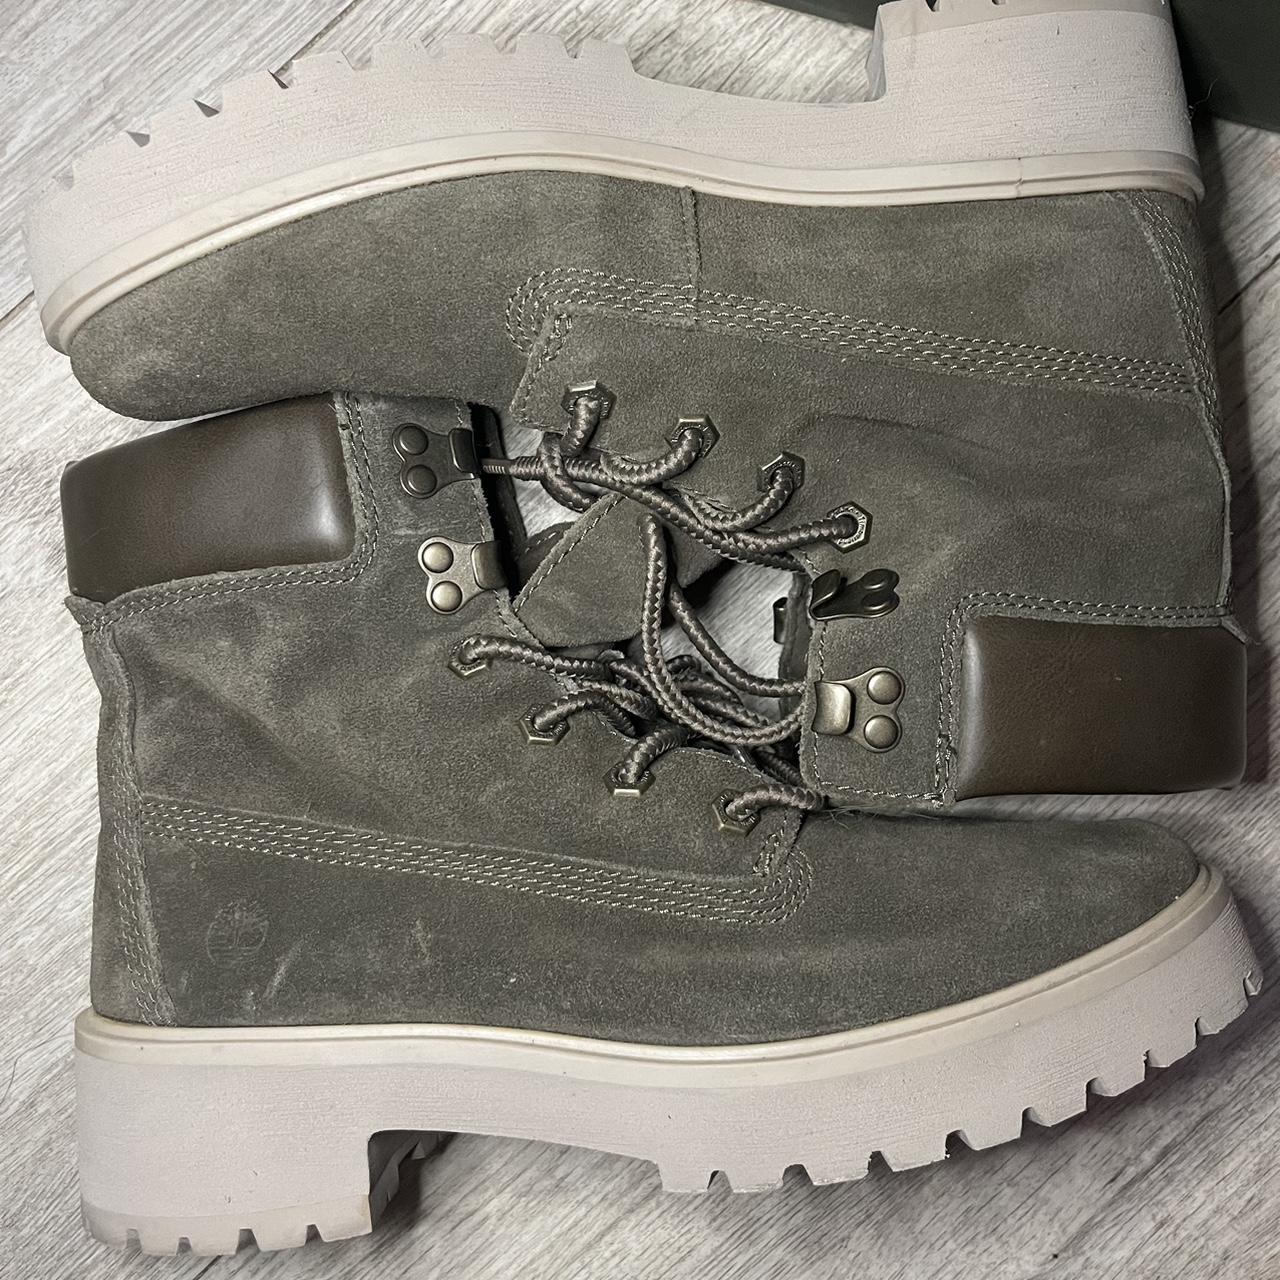 Women’s Timberland Carnaby Cool 6” Boot, Olive Suede... - Depop